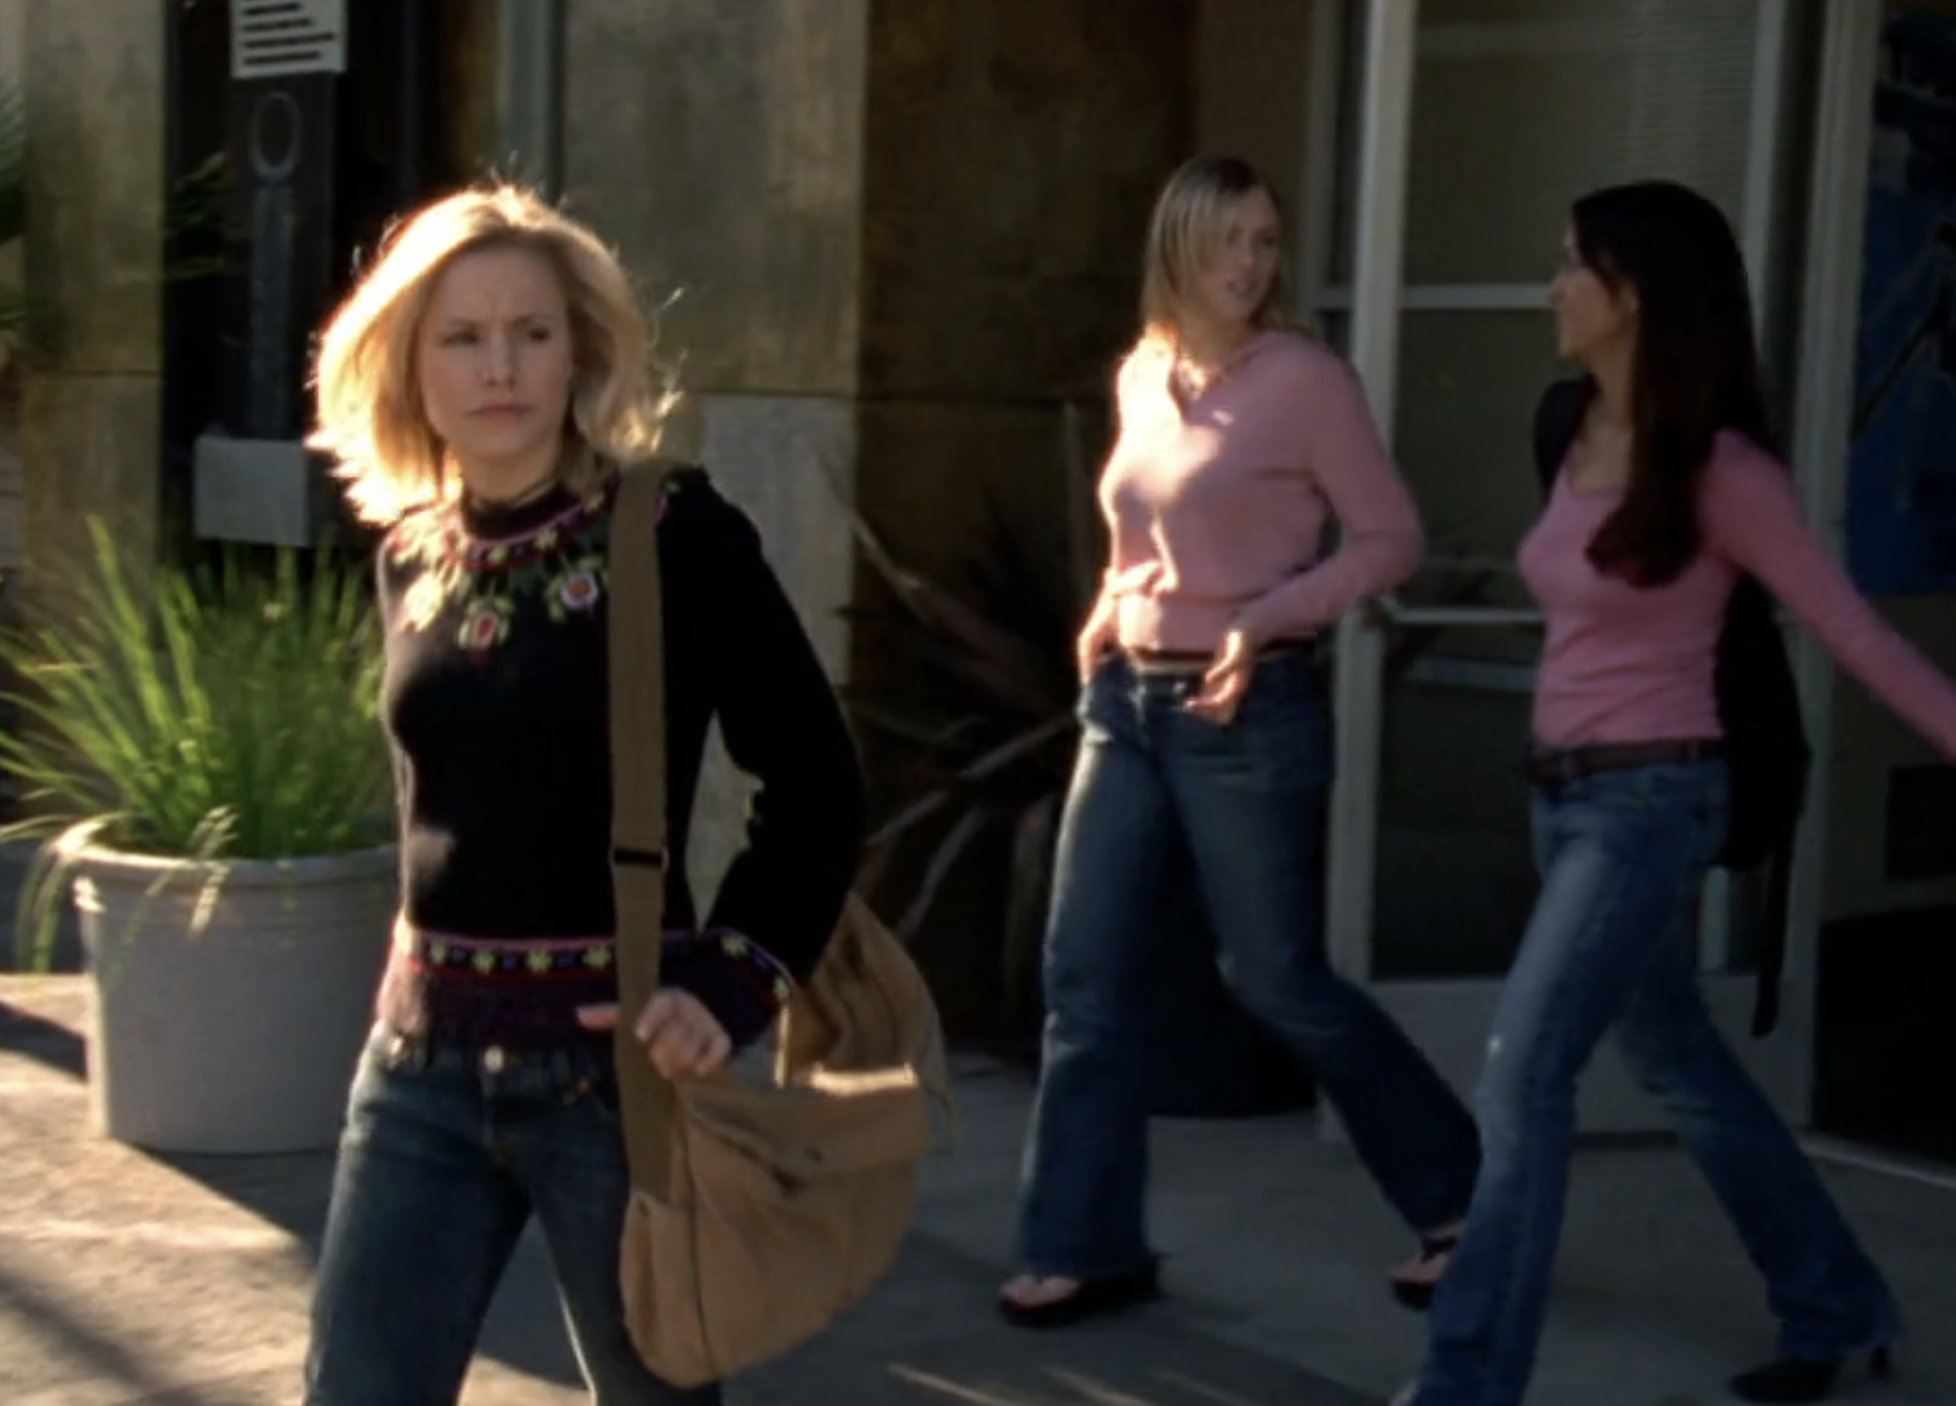 Screenshot from S1E14 of Veronica Mars. Veronica is in the foreground in a brown sweater and carrying a beige shoulder bag. In the background are two young women dressed almost identically in longsleeved, v-neck pink shirts and dark, flared jeans.